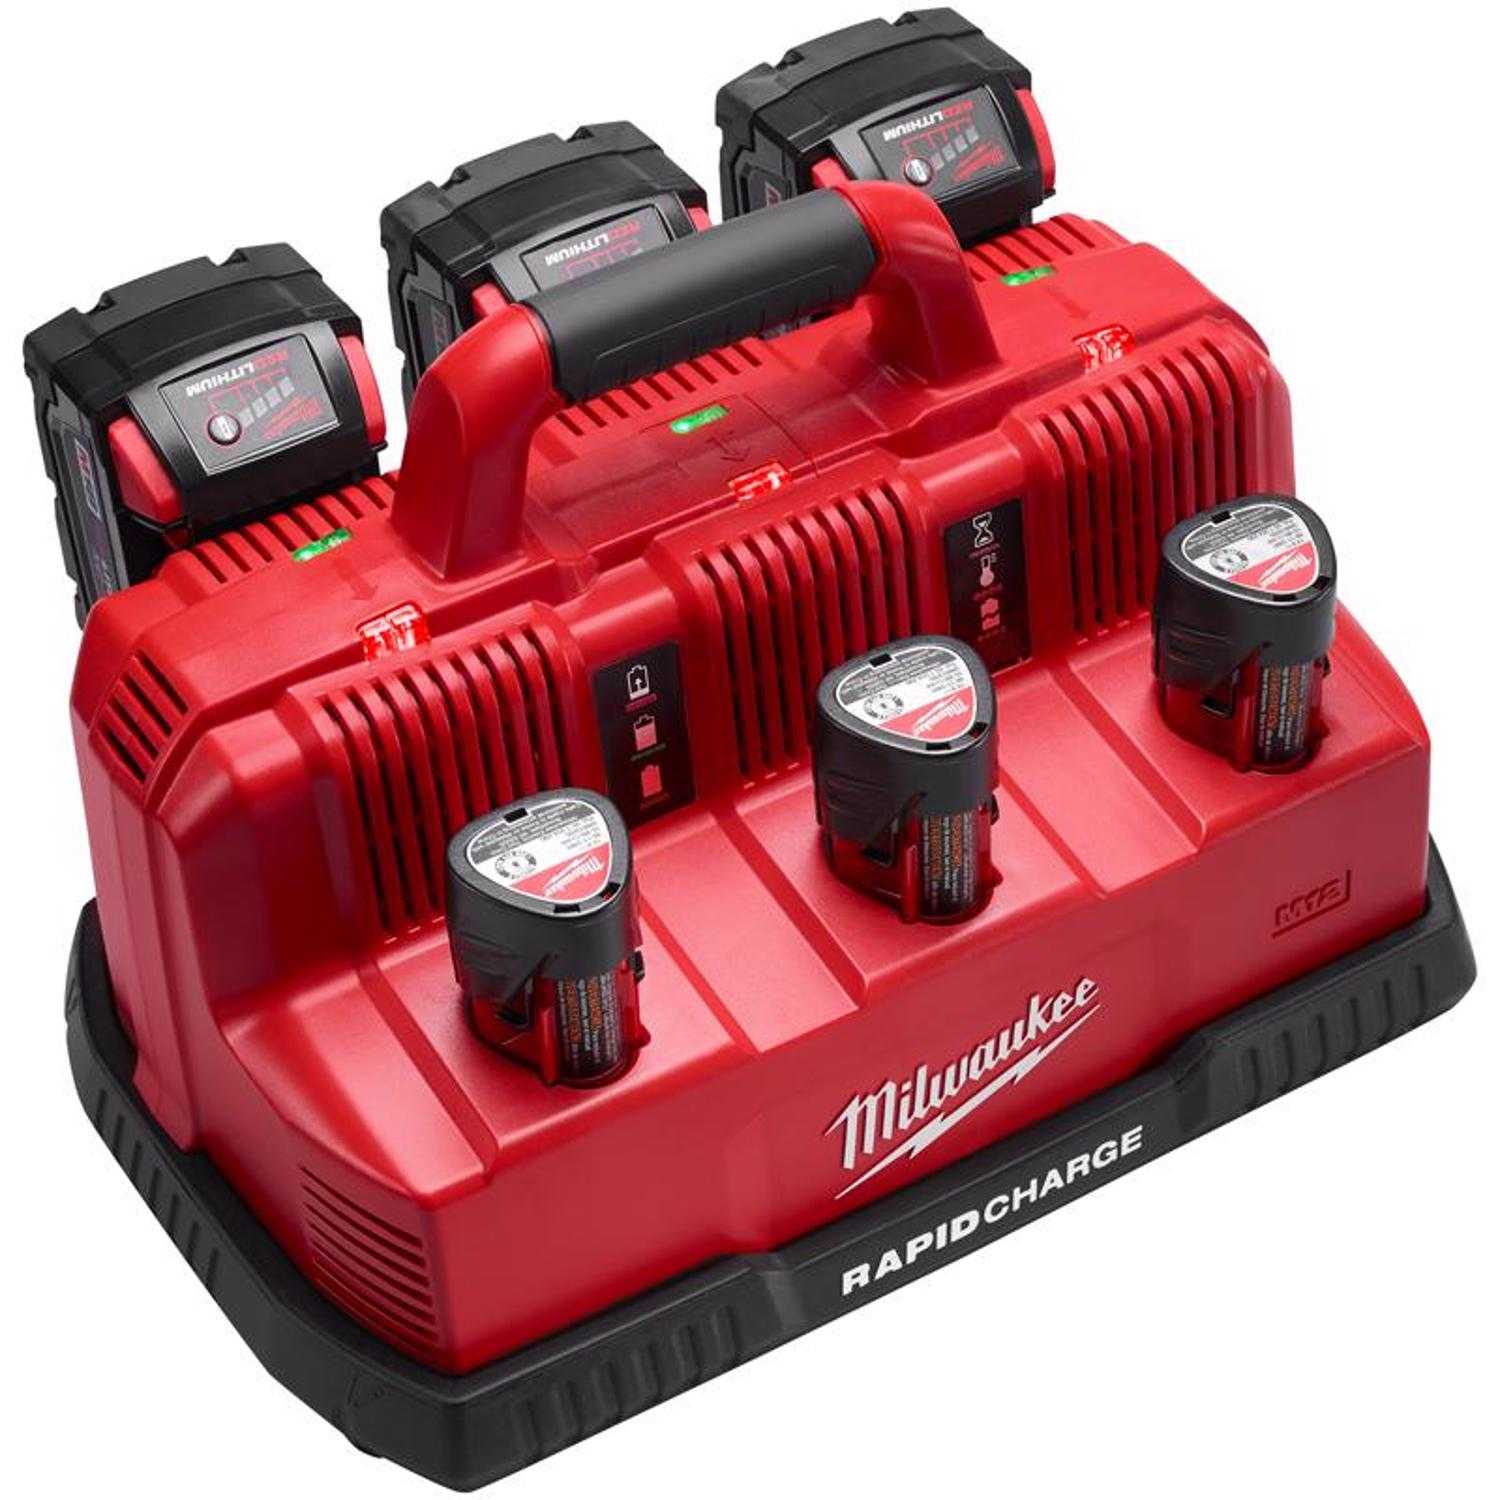 Tool Battery Chargers